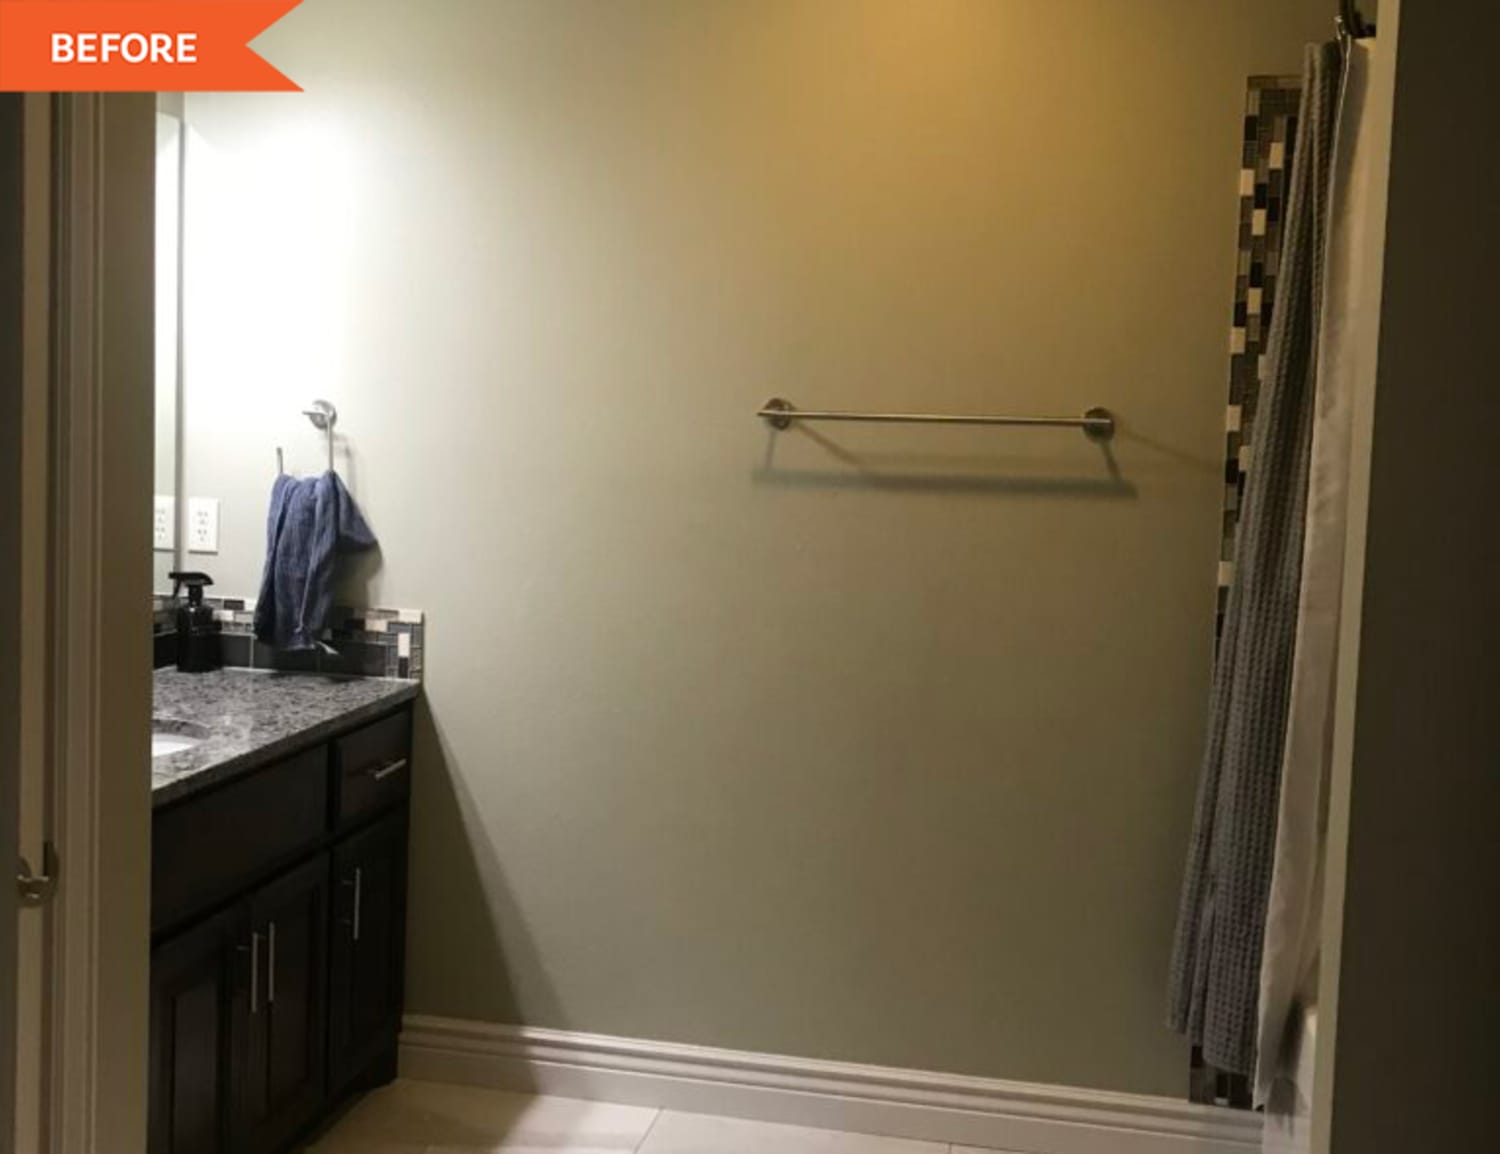 Before and After: This No-Demo $500 Bathroom Redo Features a DIY Concrete Wall